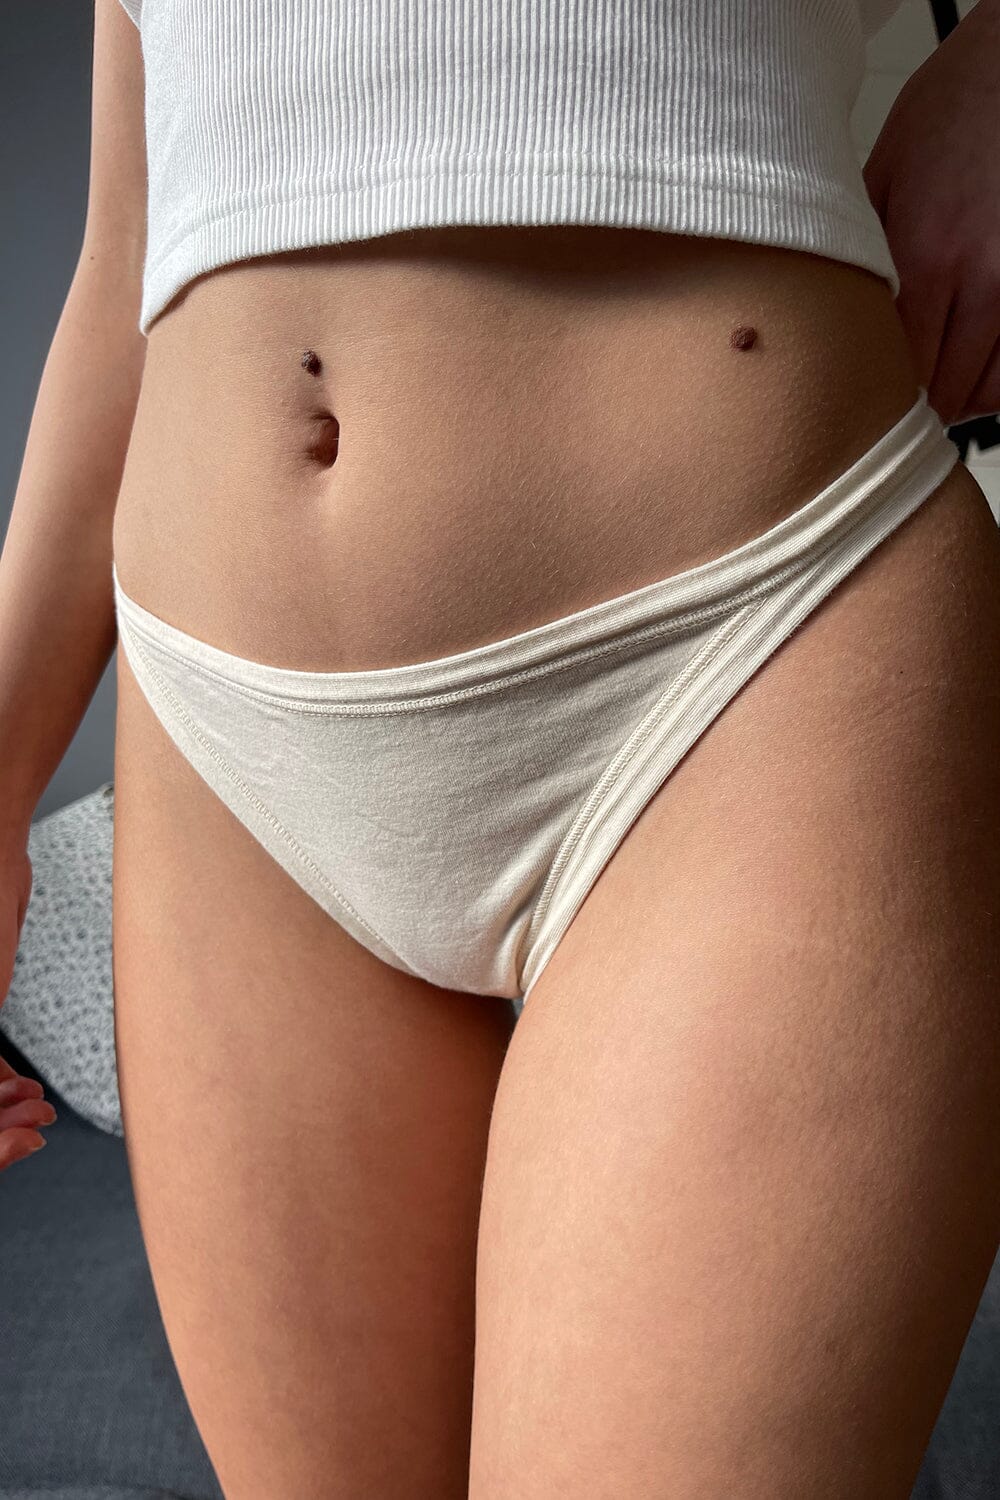 Brandy Melville heart boxers White - $29 - From Talia